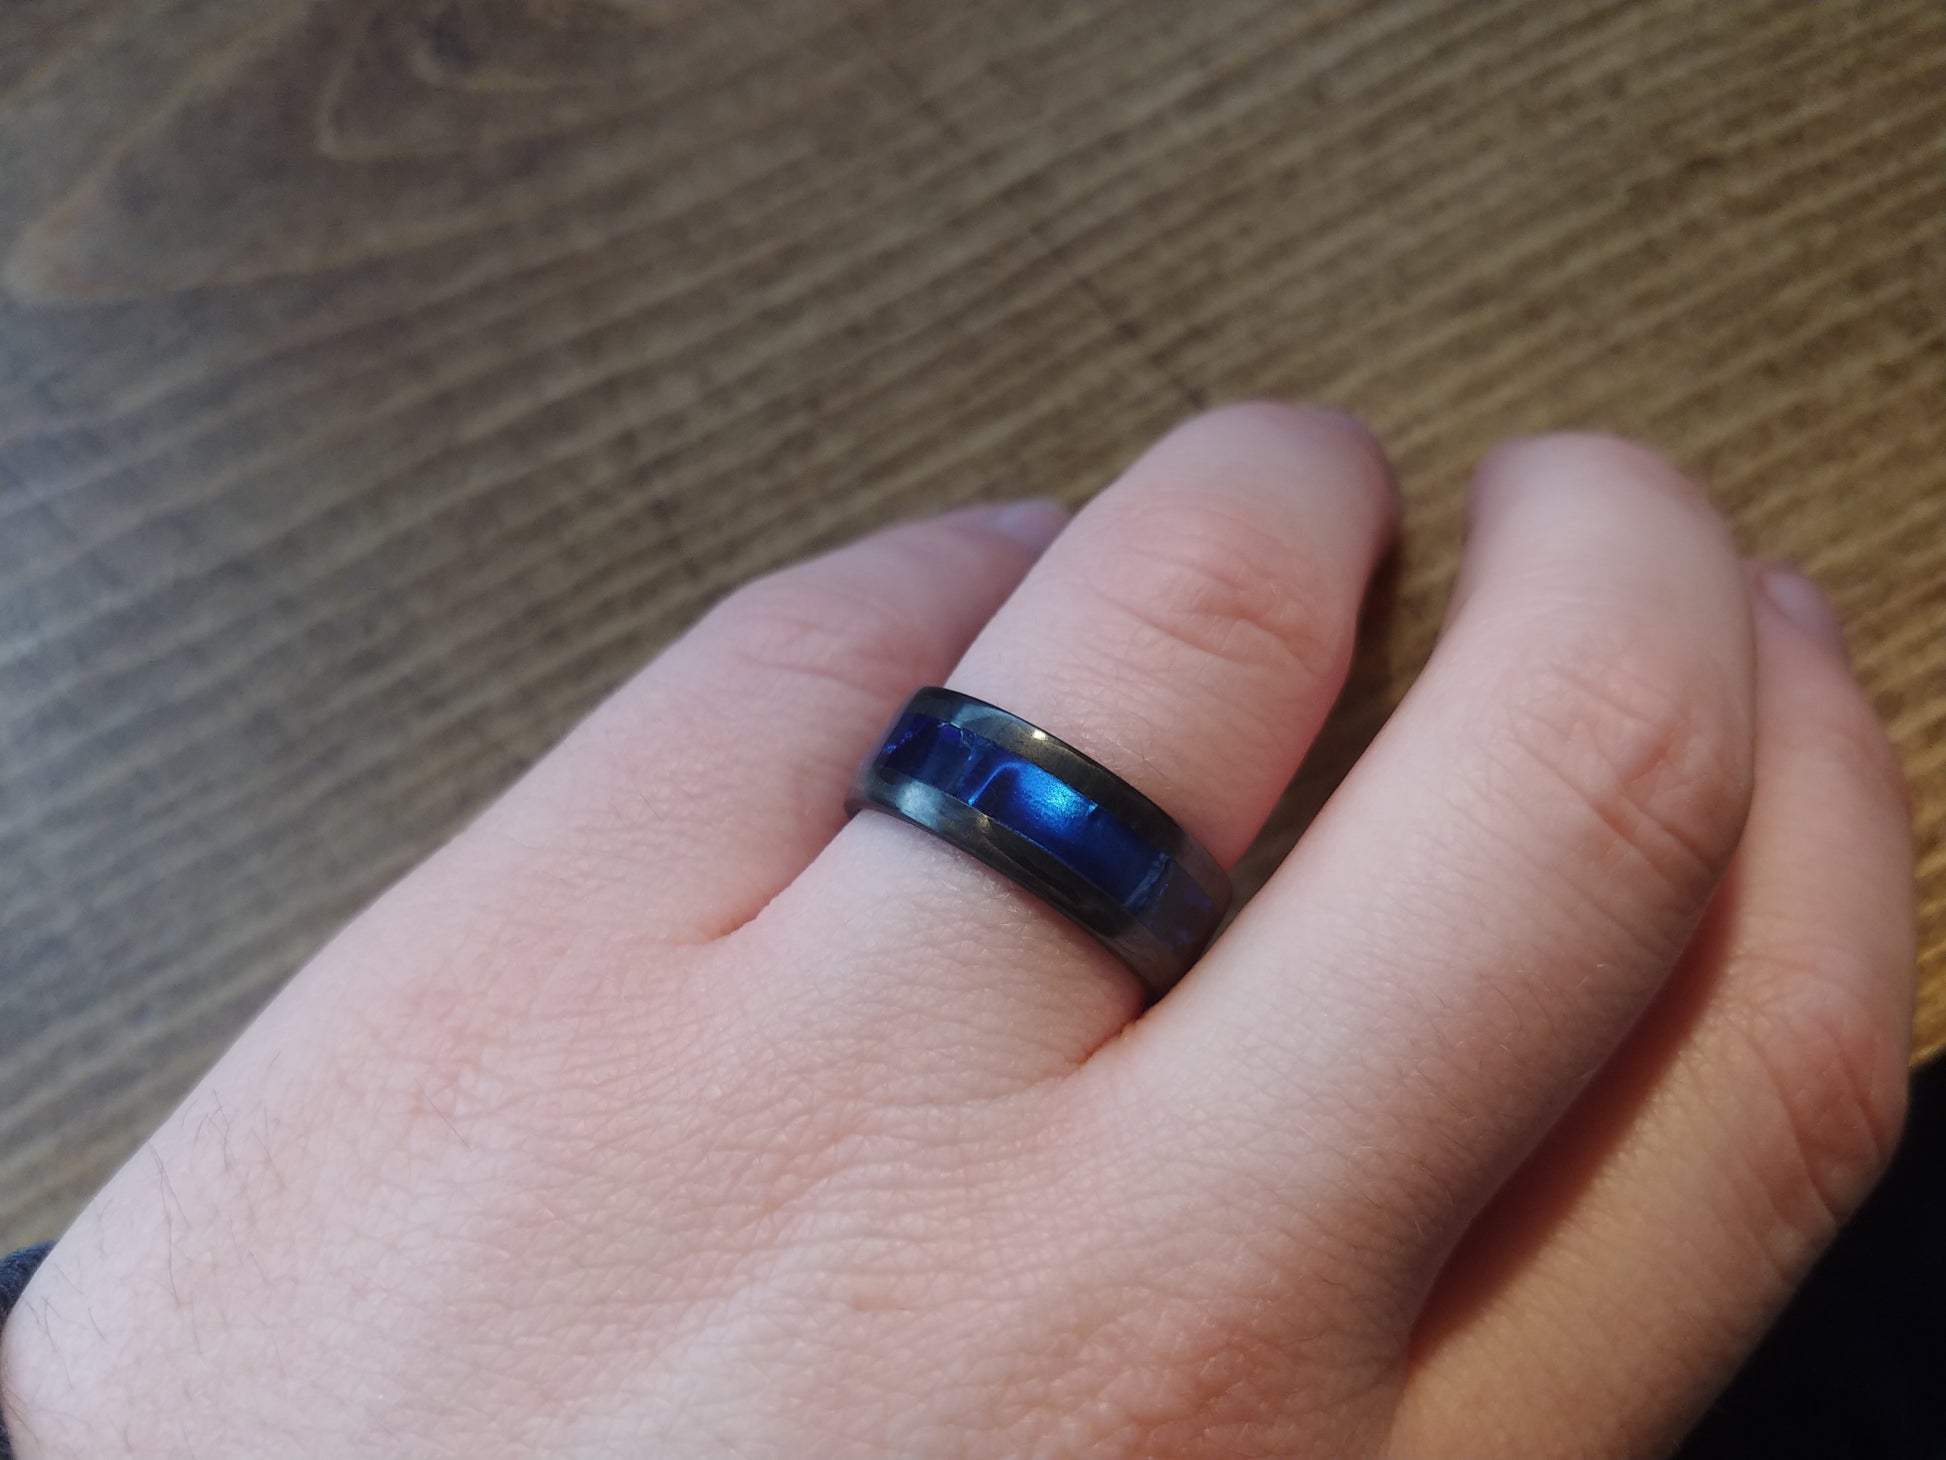 Carbon fiber with blue inlay - DreamWood Rings Supplies